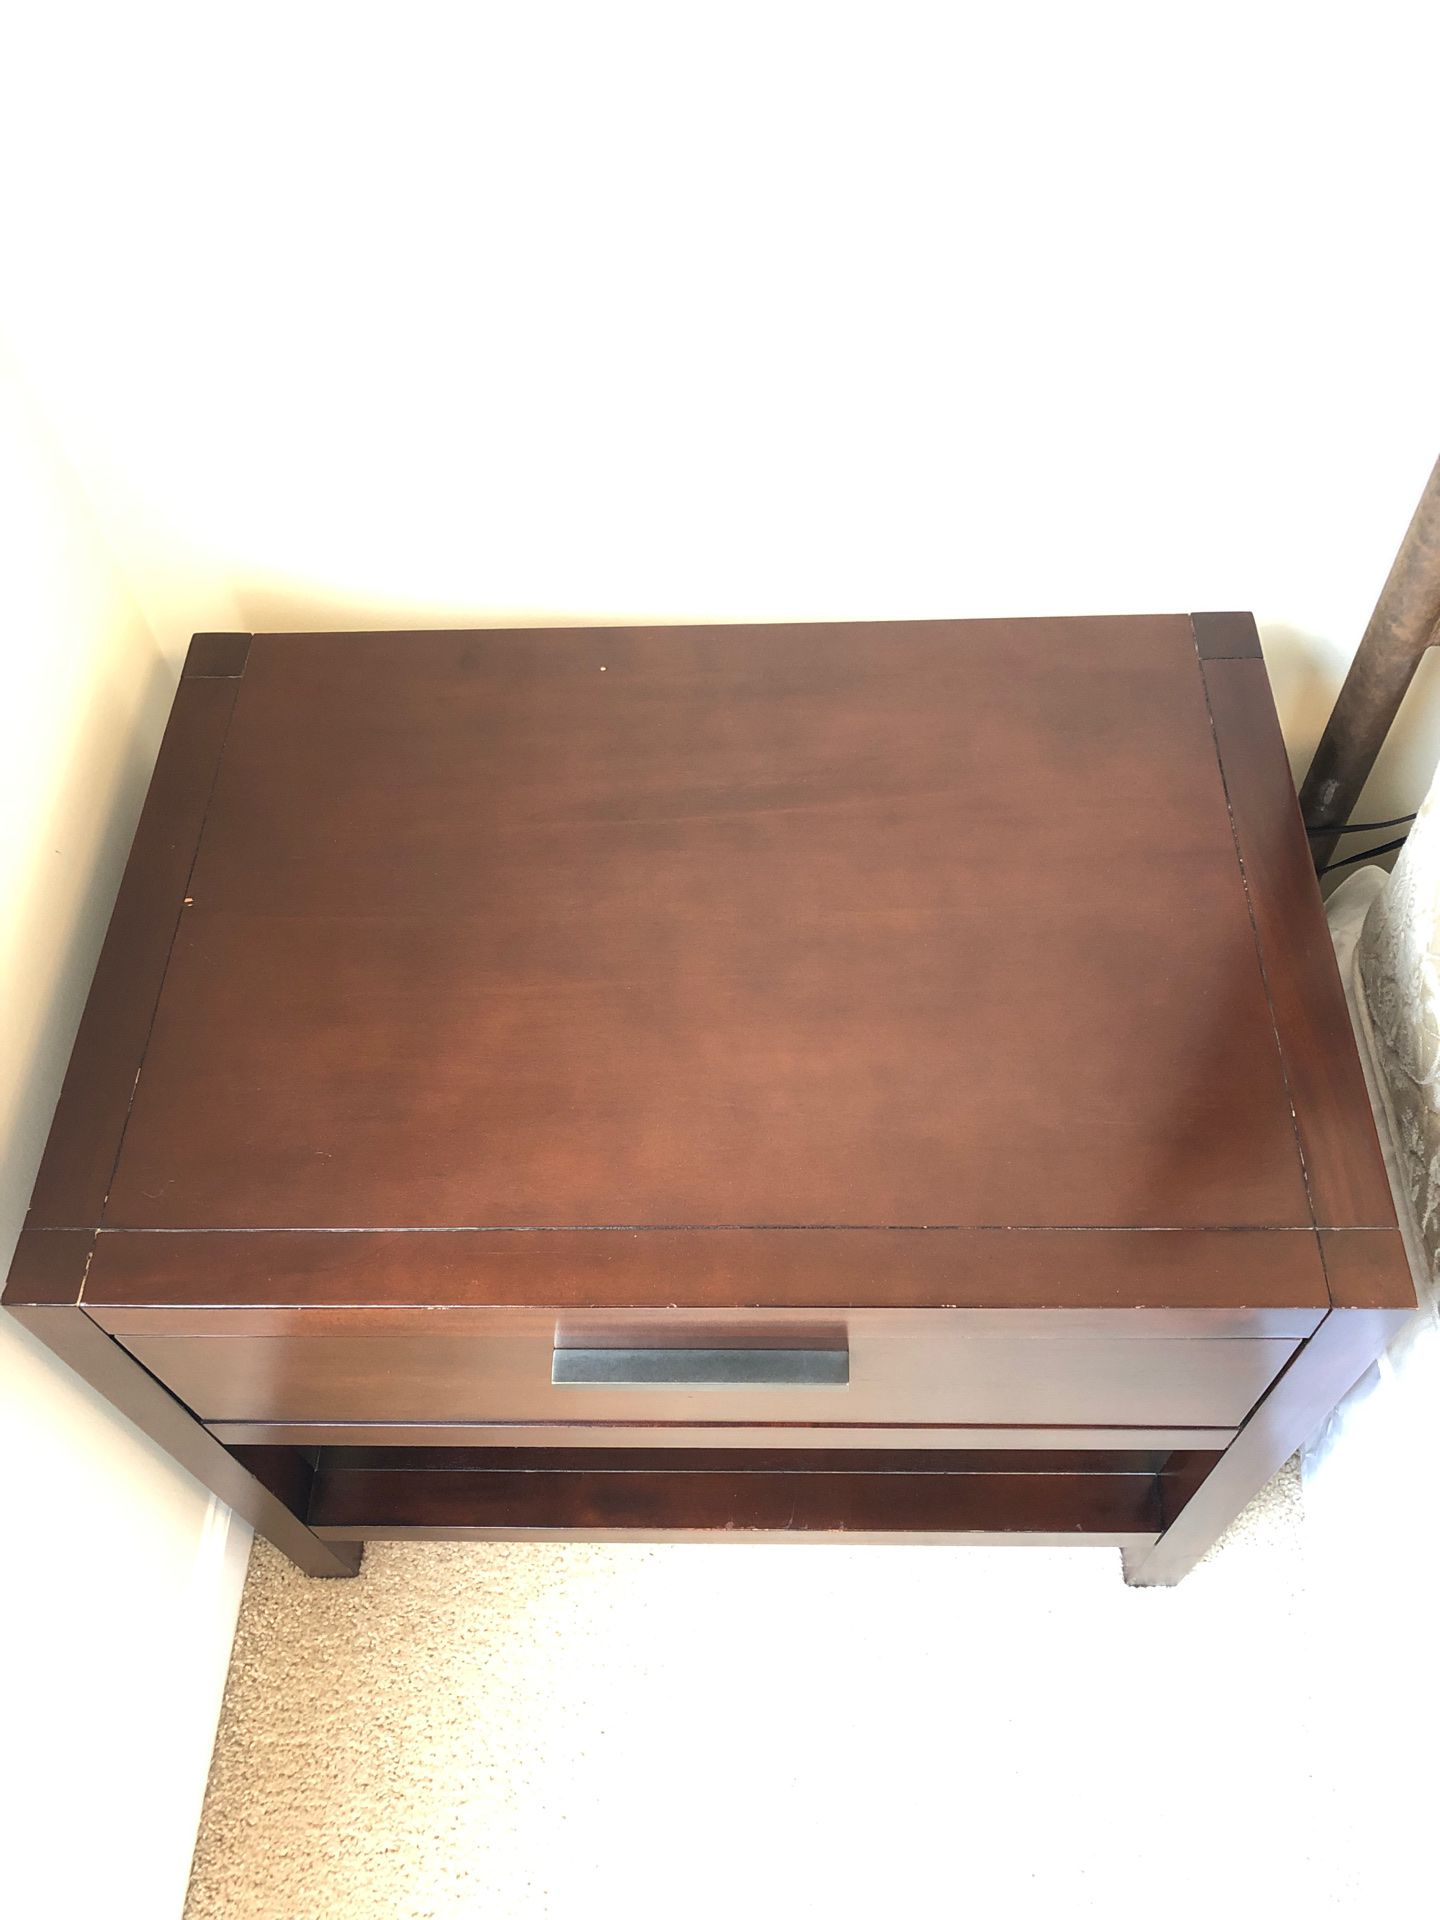 Nightstand or end table